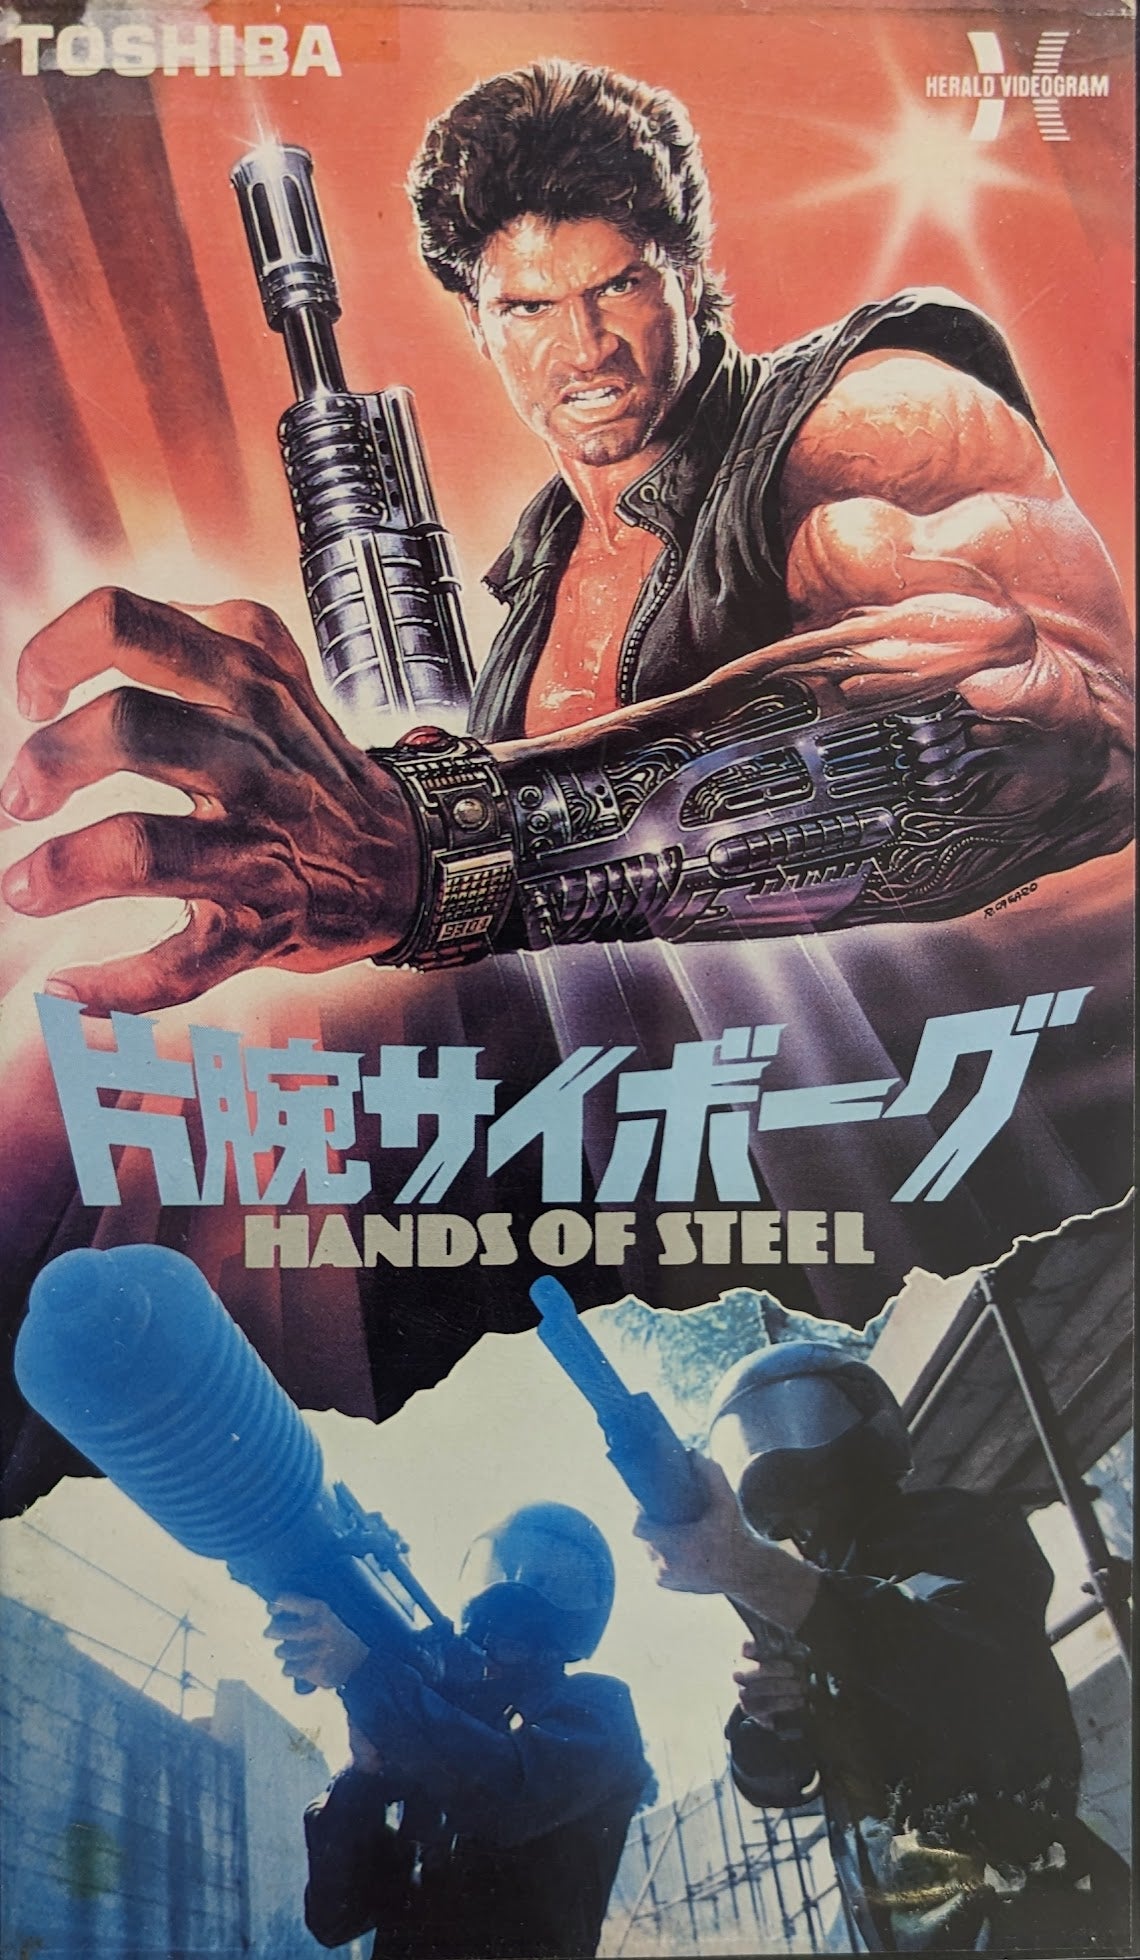 Hands of Steel (1986) Japanese VHS